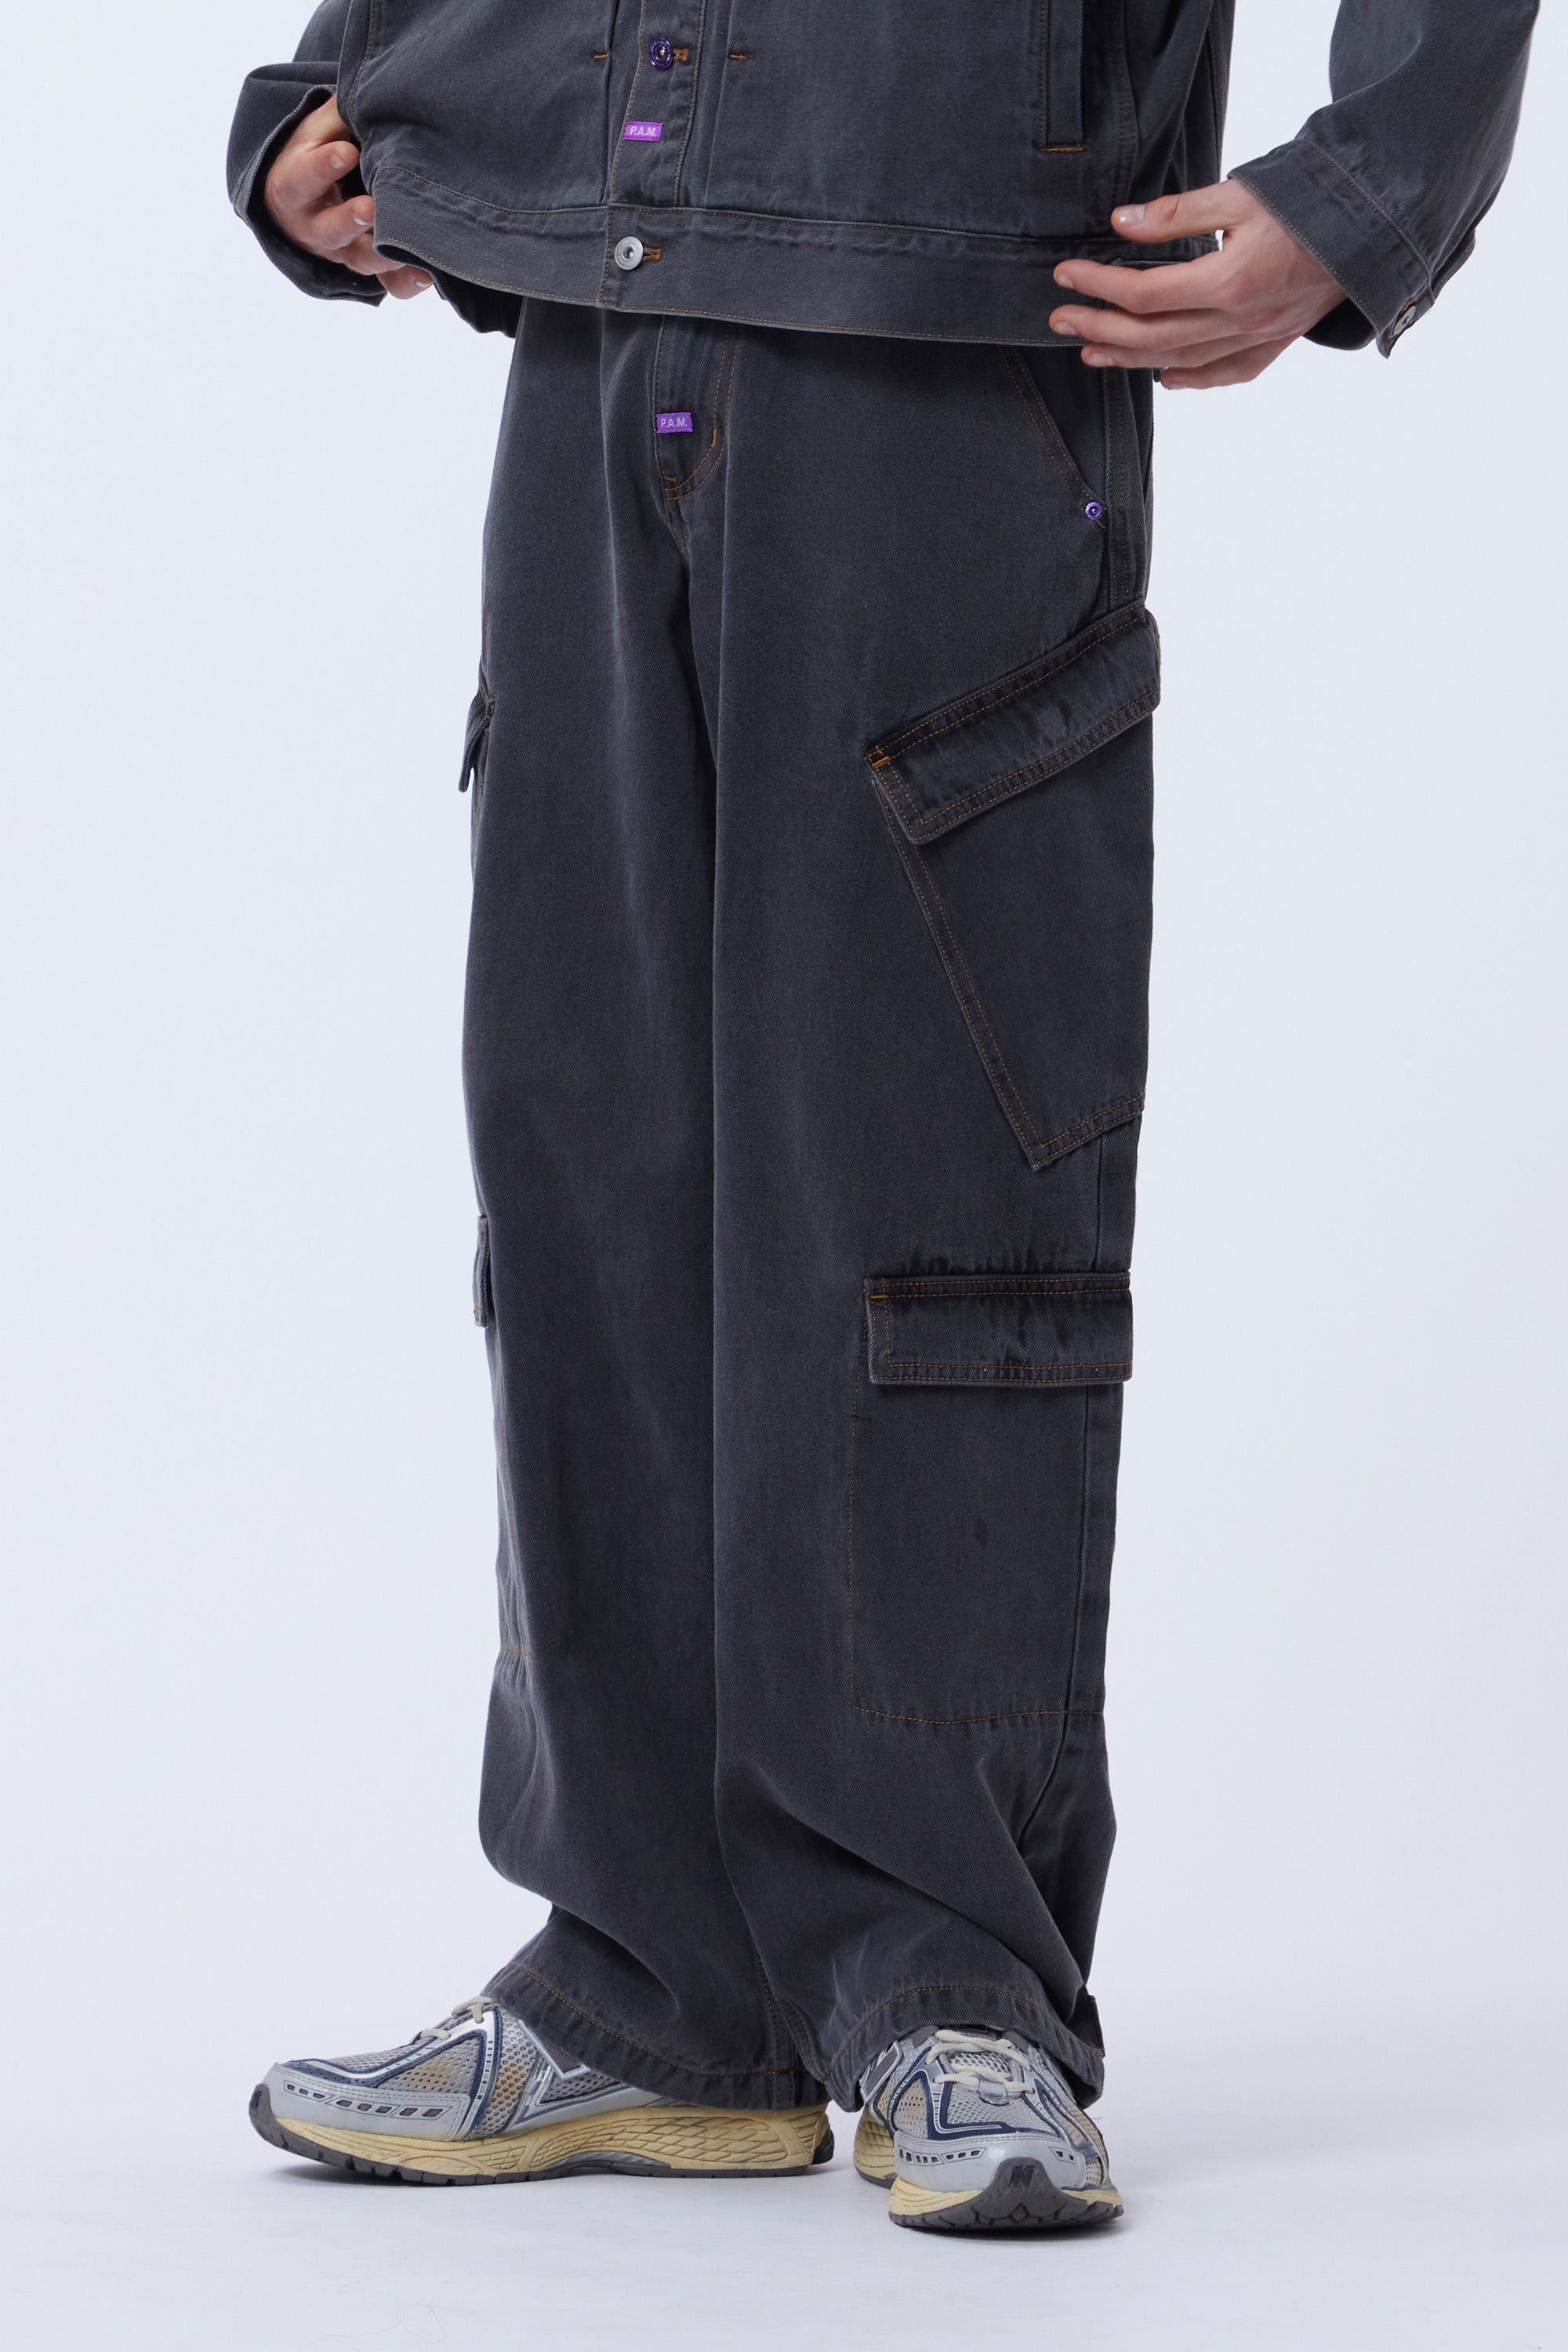 The CYCLOPES LOW RISE POCKET DENIM JEAN  available online with global shipping, and in PAM Stores Melbourne and Sydney.